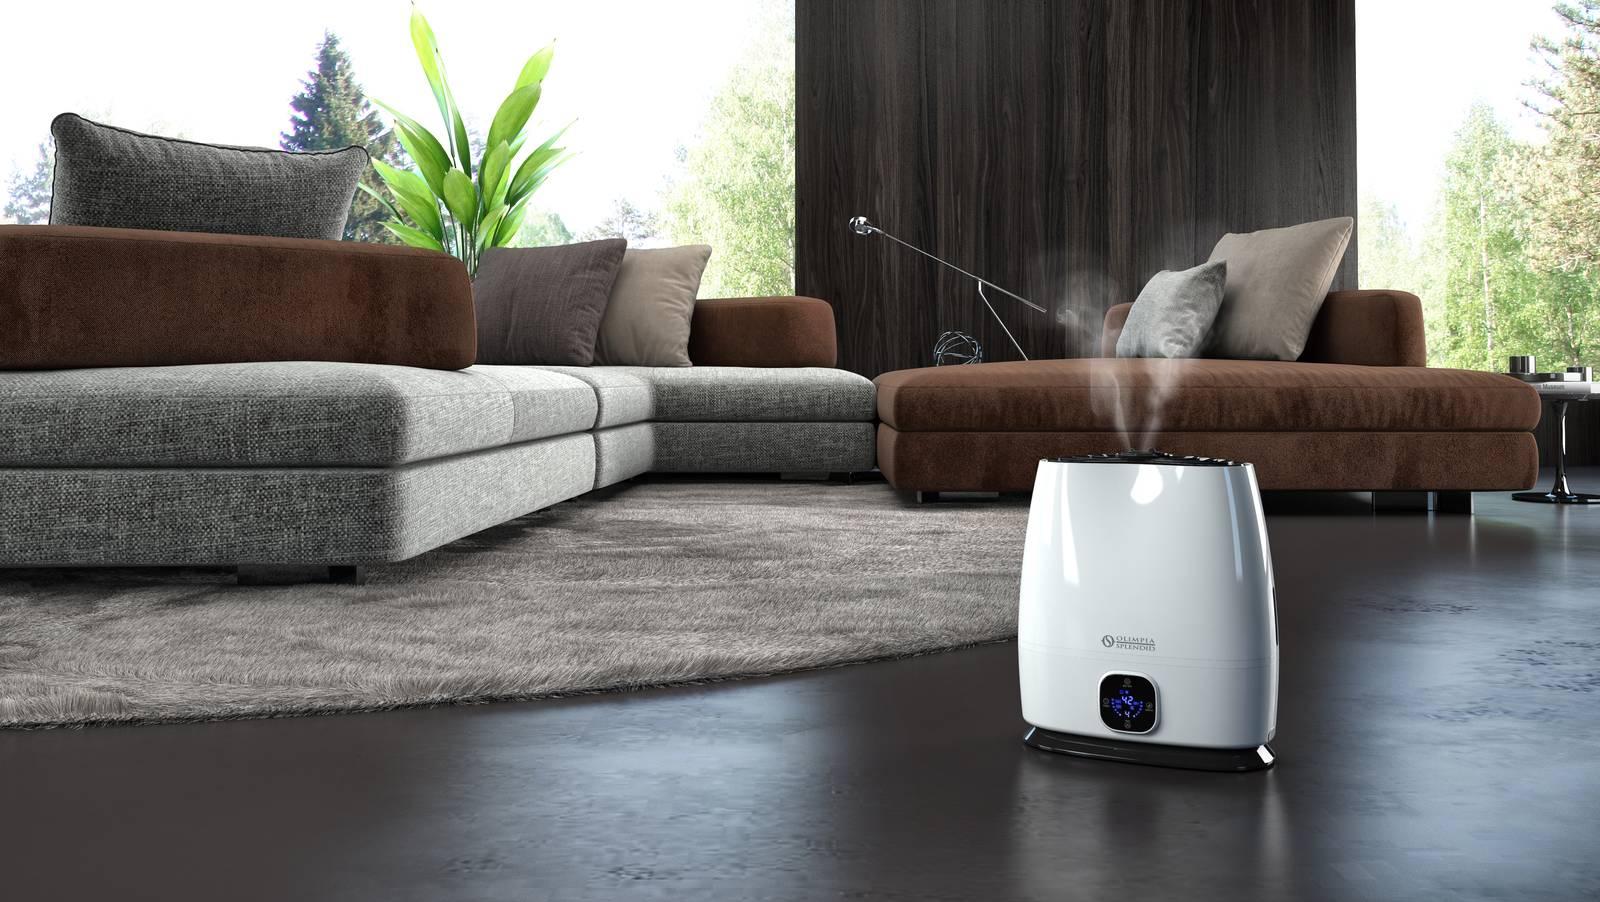 Ways to humidify an environment with tricks and use of efficient devices